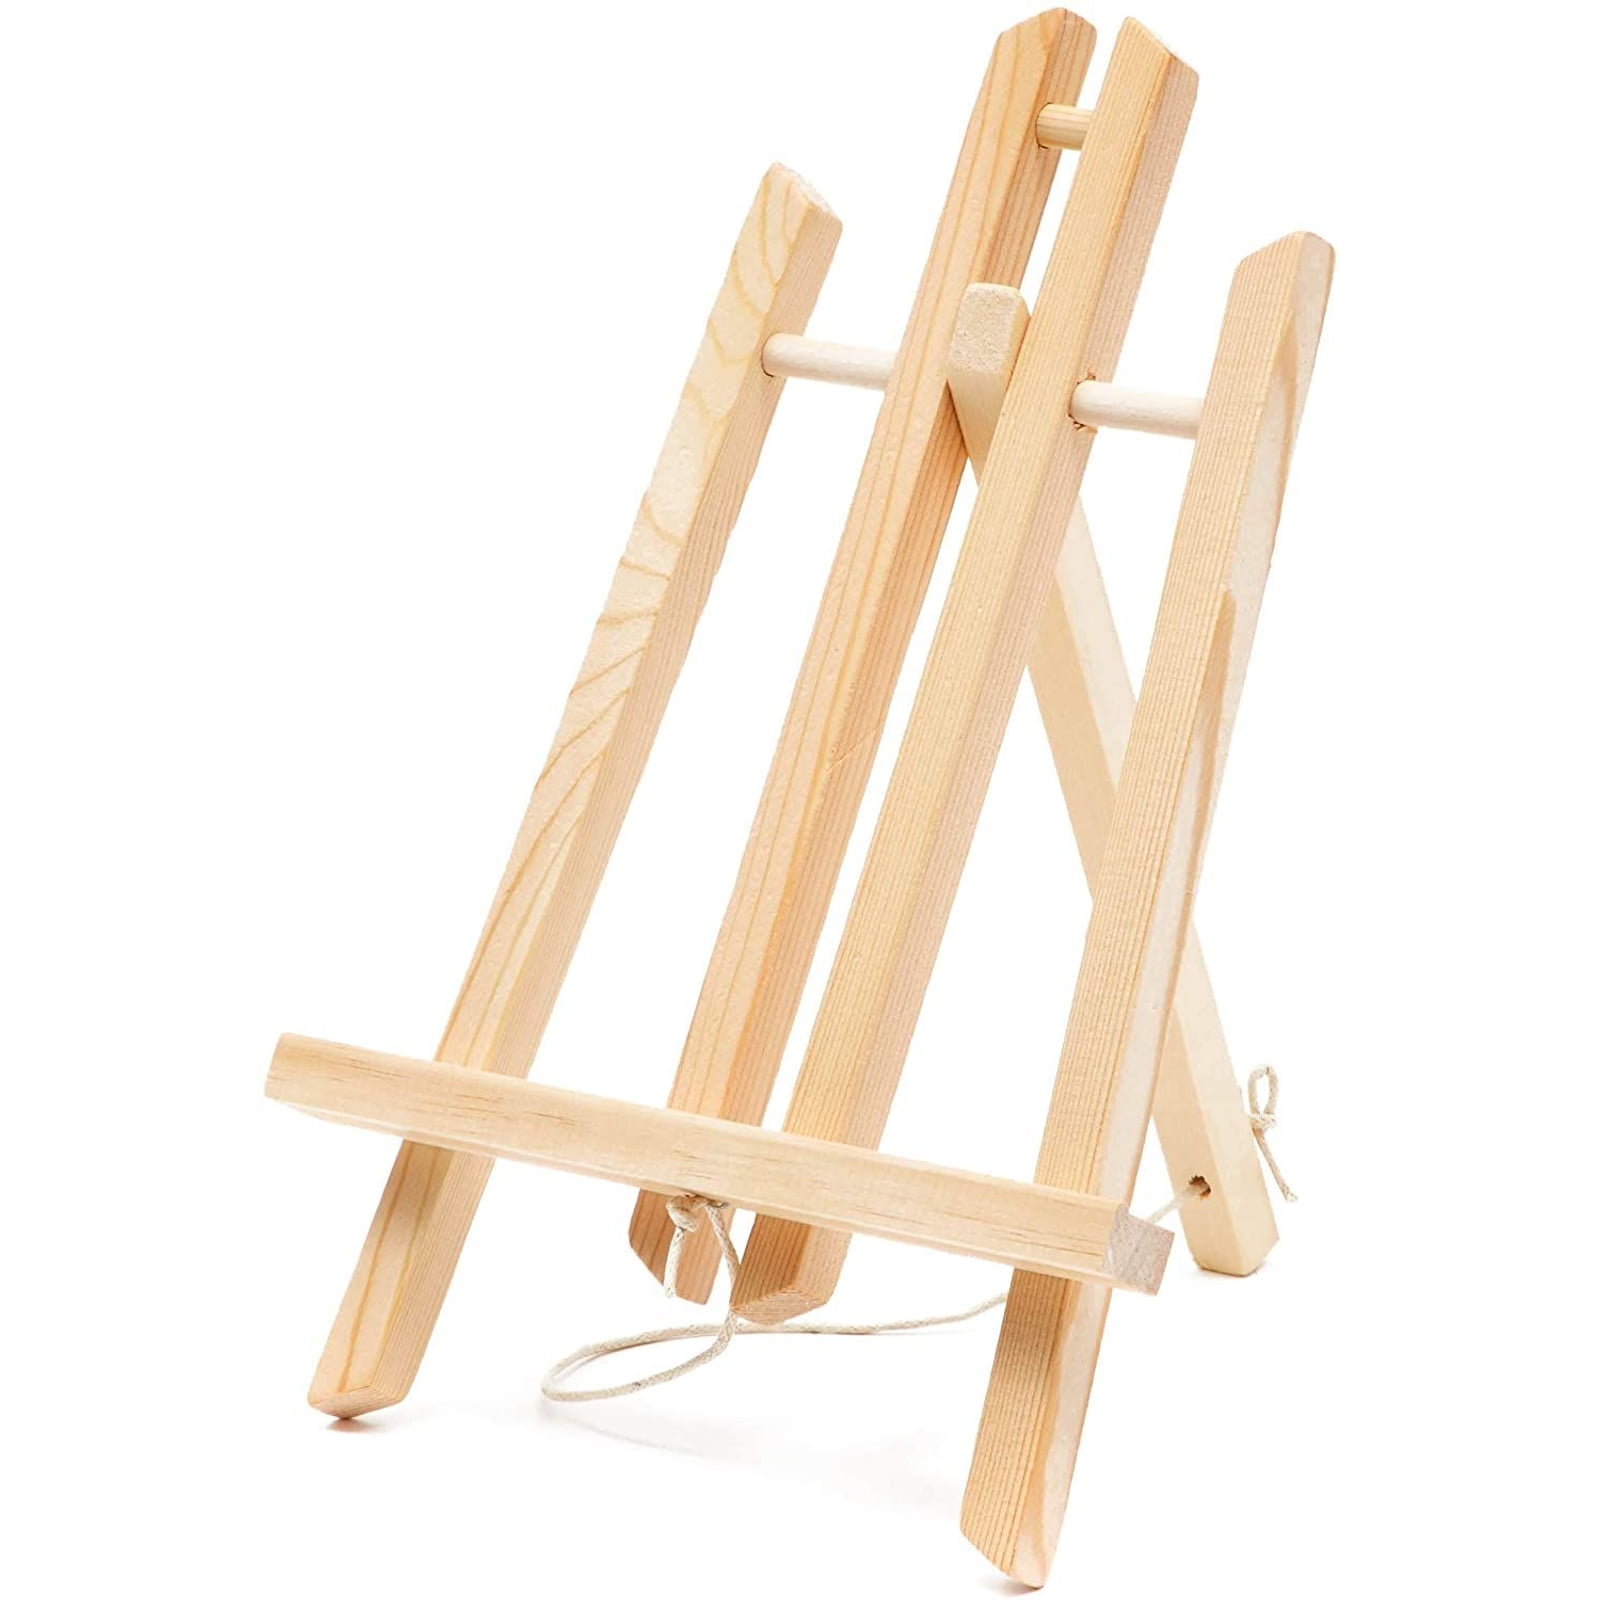 wooden mini easel pine wood 12 cm dispaly canvas art craft table stand wedding 